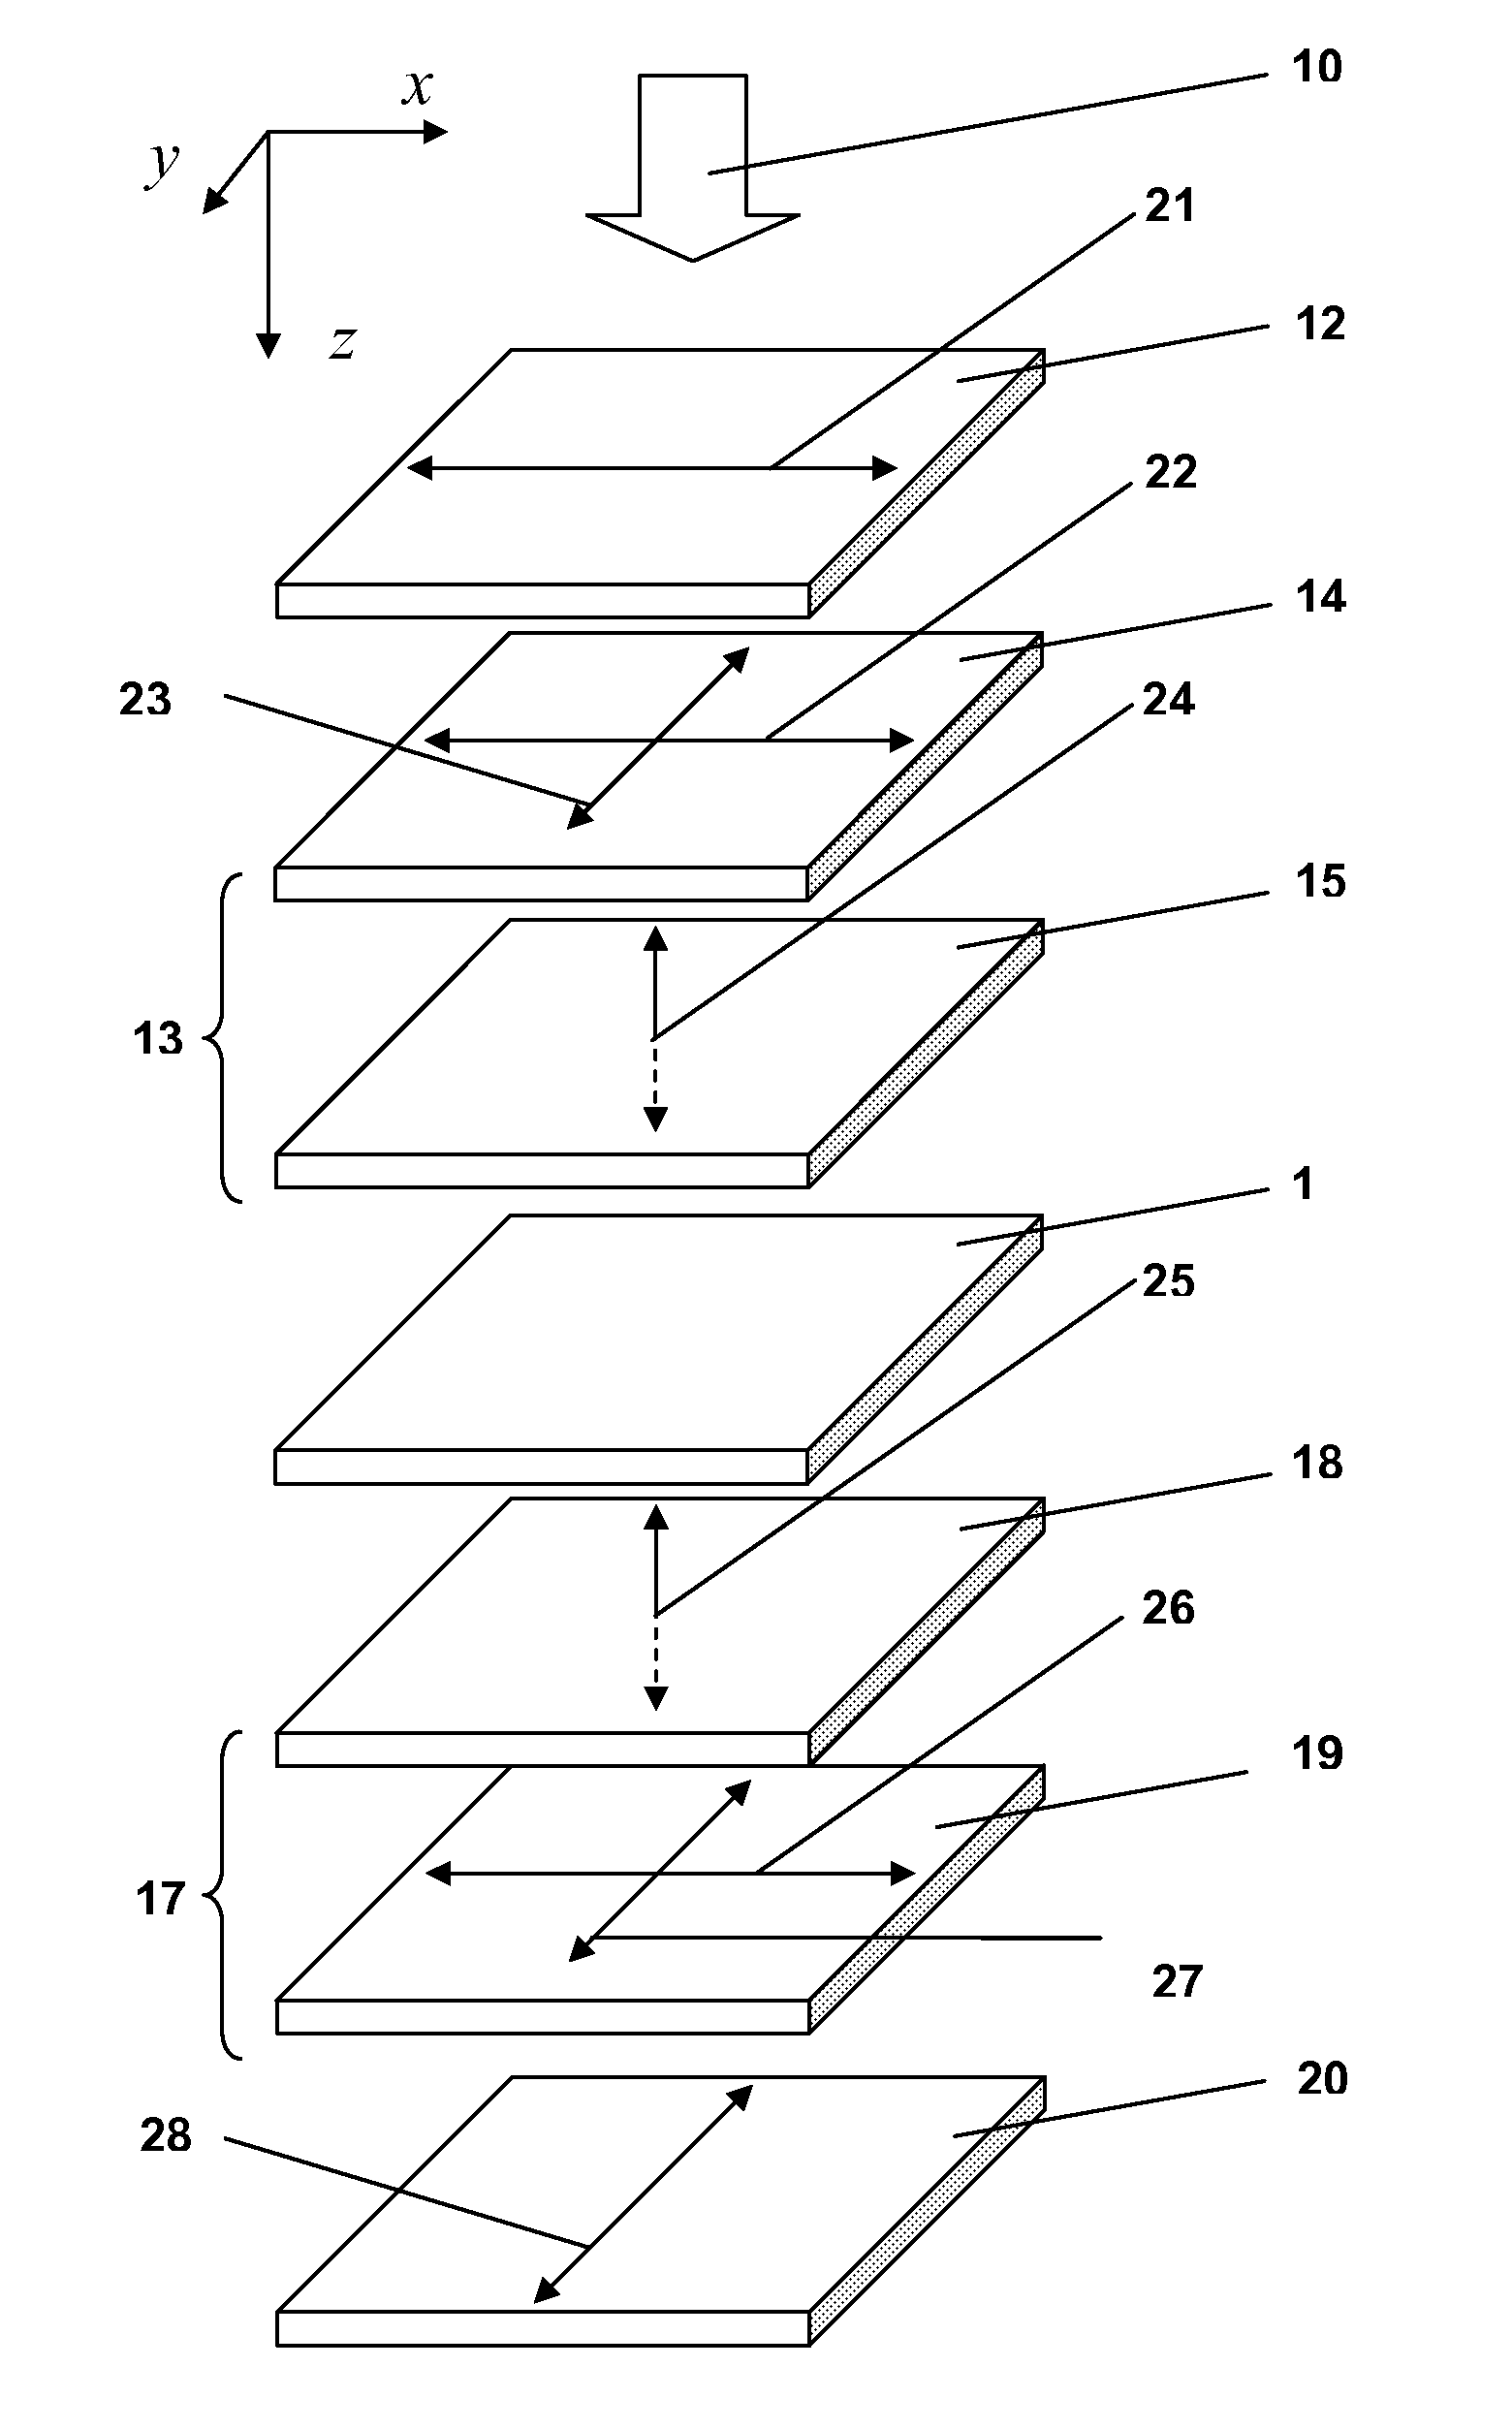 Color Liquid Crystal Display and Compensation Panel